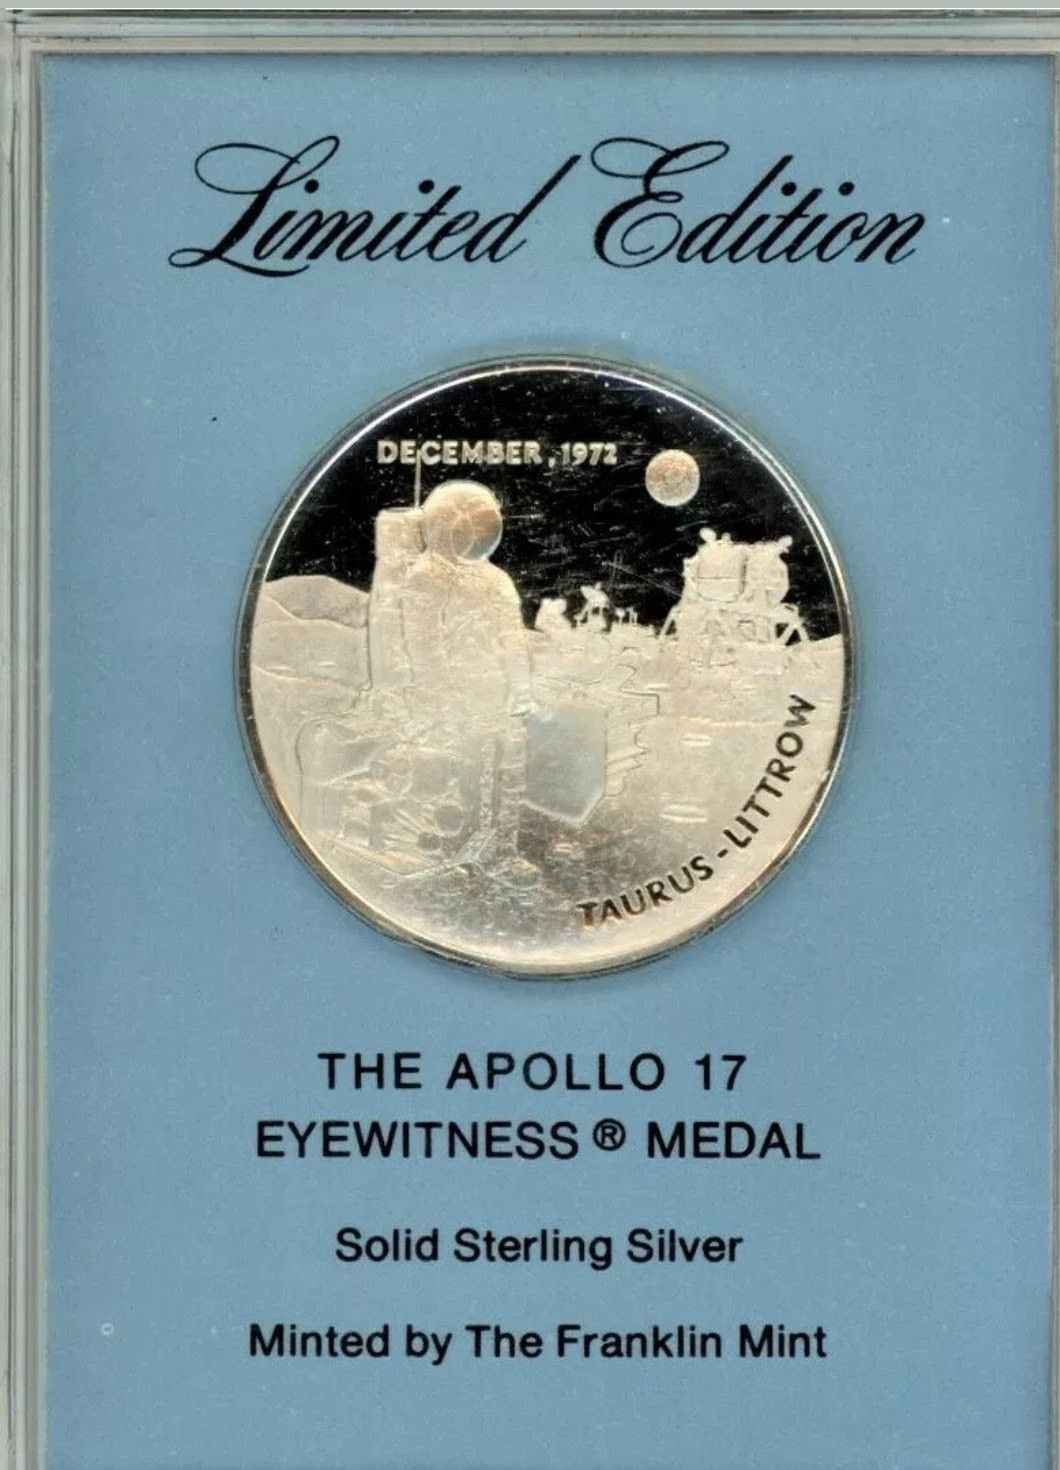 THE APOLLO 17 EYEWITNESS MEDAL "FRANKLIN MINT" *100%PURE SILVER ,925*